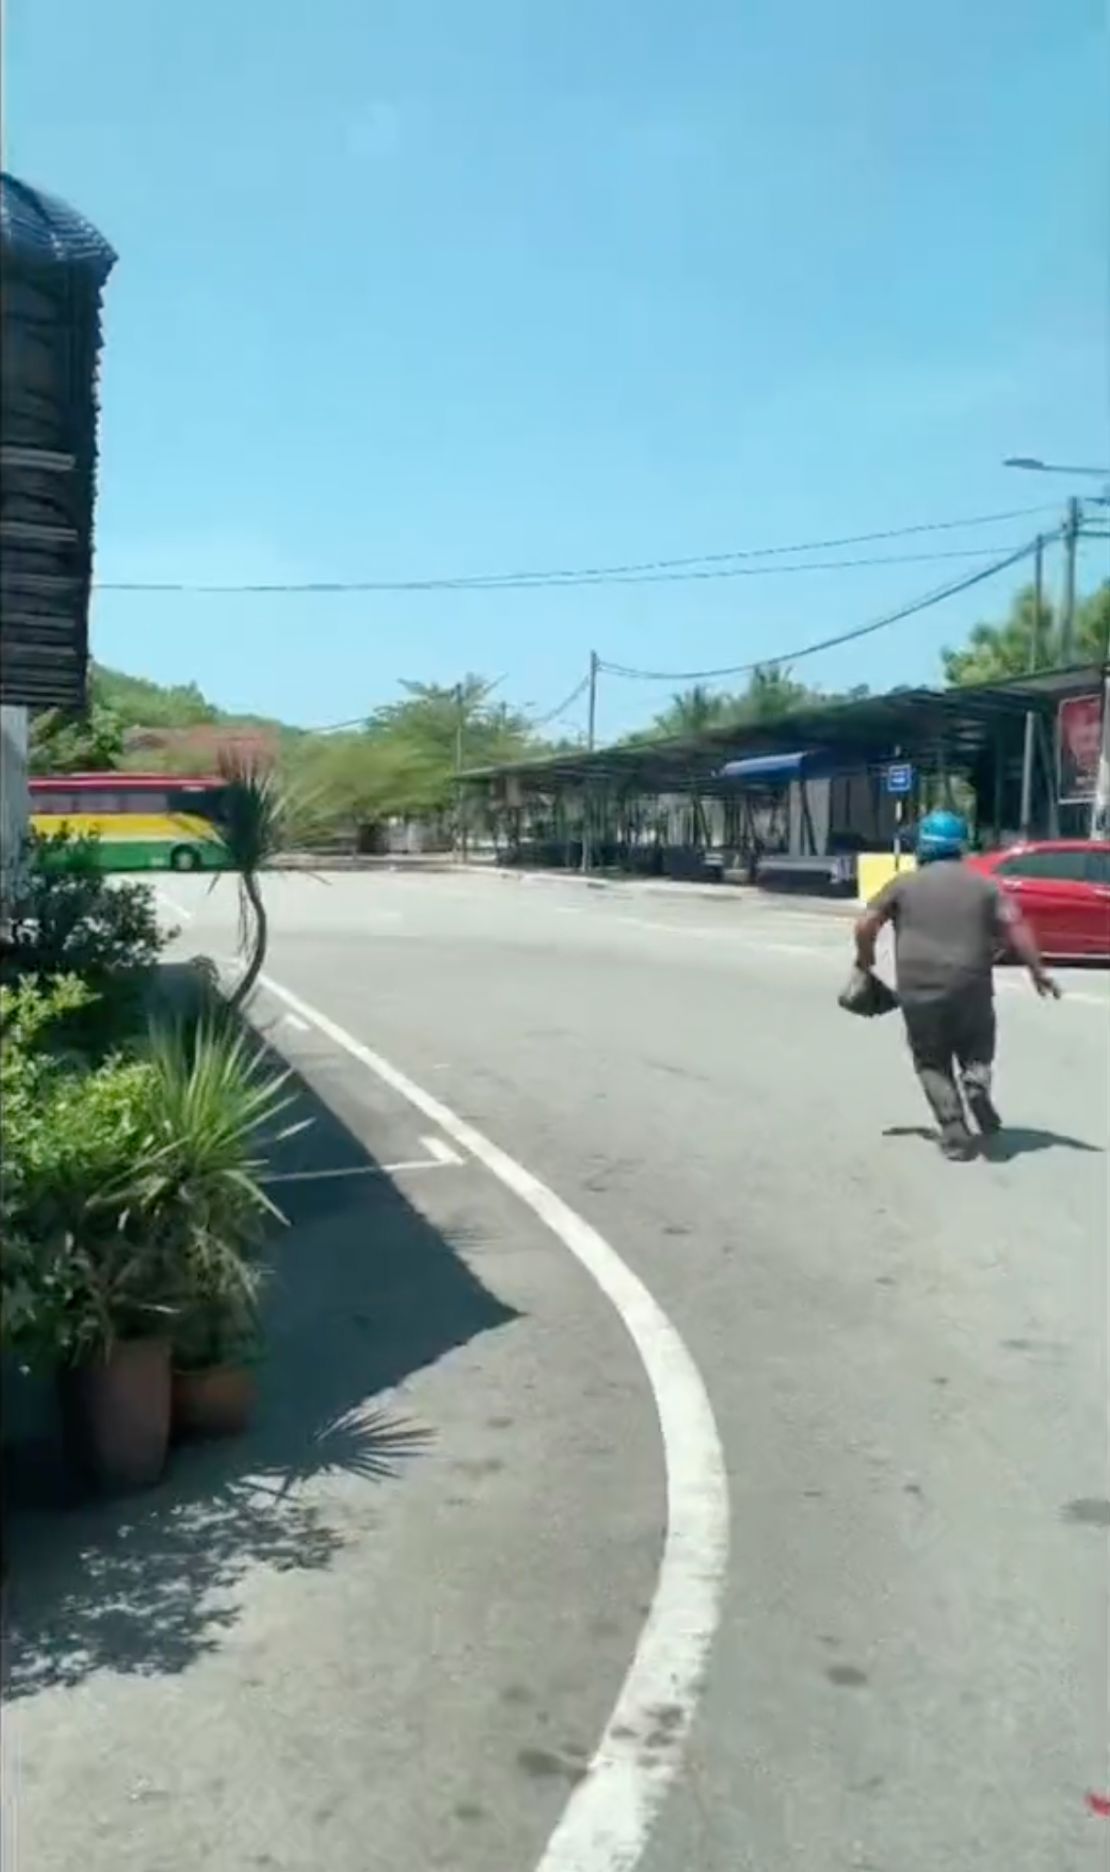 A man runs away from a religious police raid on a restaurant in the state of Perak. Image taken from a video of the raid that was released on TikTok by local authorities.